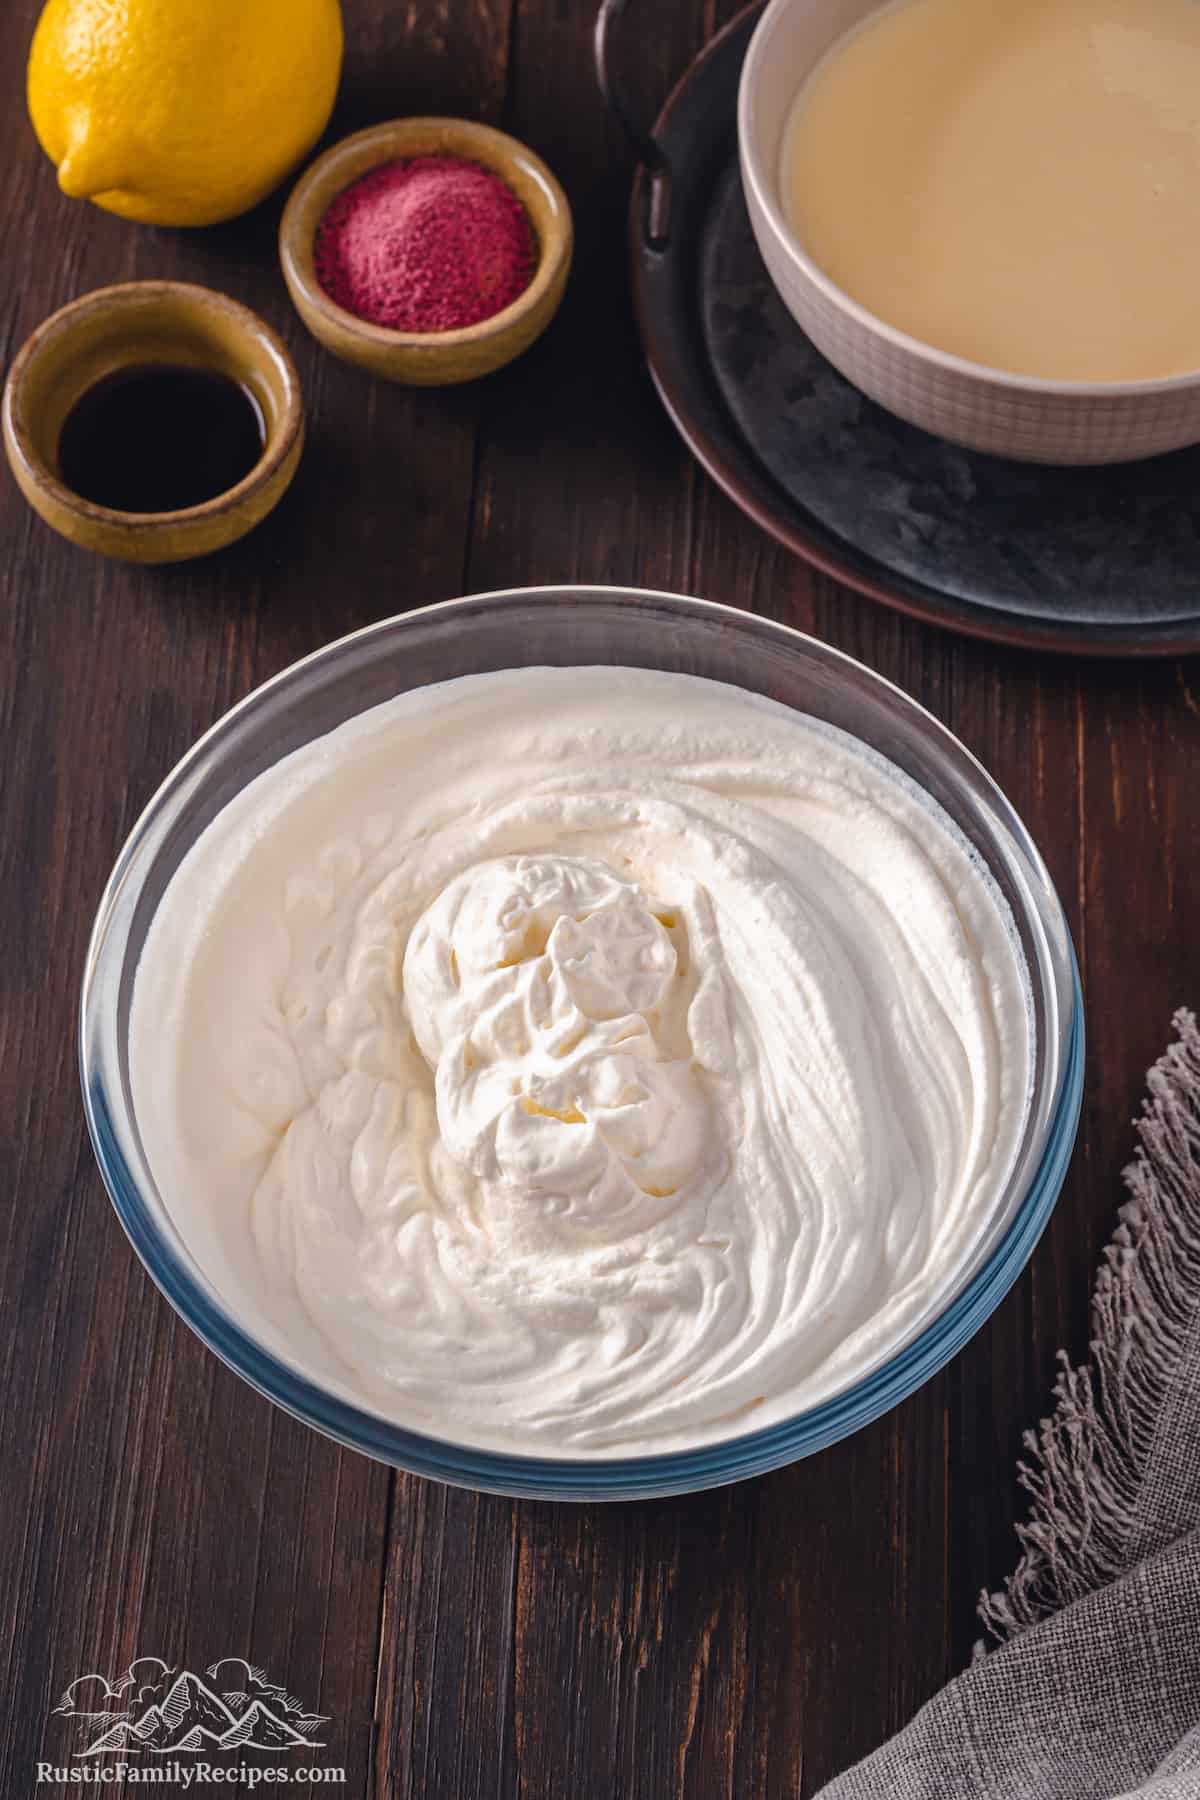 Whipped cream in a large mixing bowl, next to small bowls of food coloring and a bowl of condensed milk.